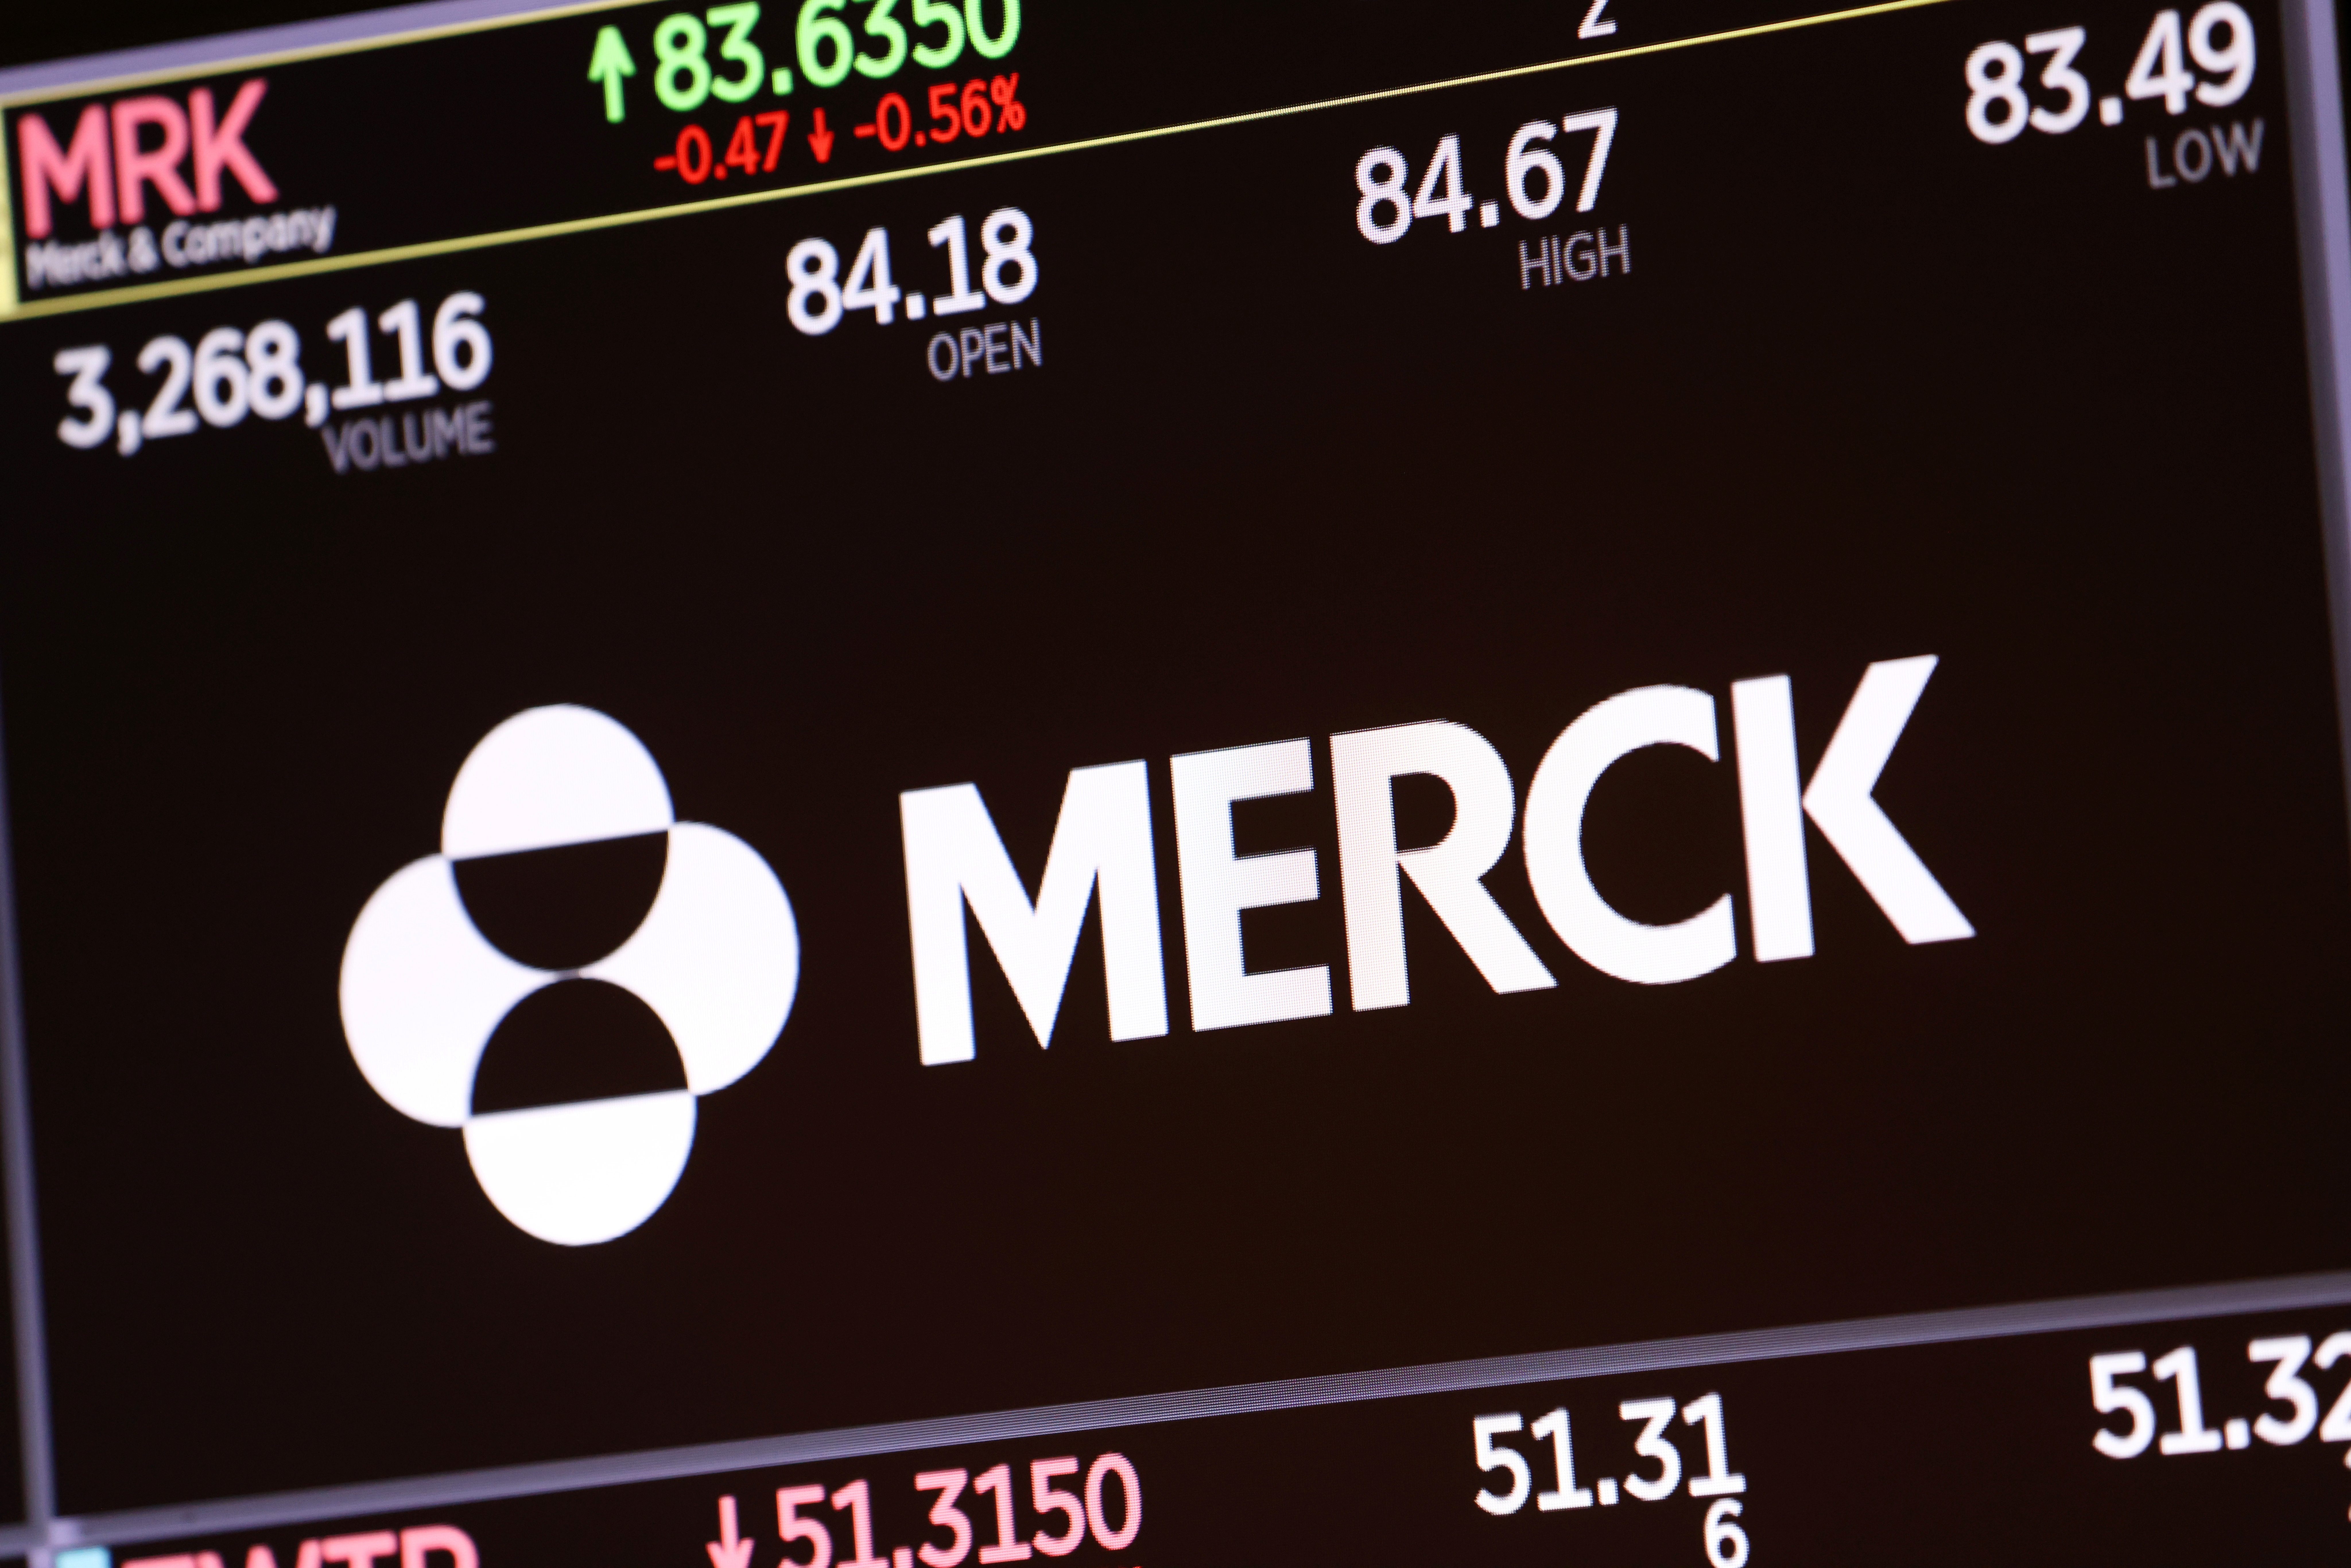 The logo for Merck & Co. is displayed on a screen at the New York Stock Exchange (NYSE) in New York City